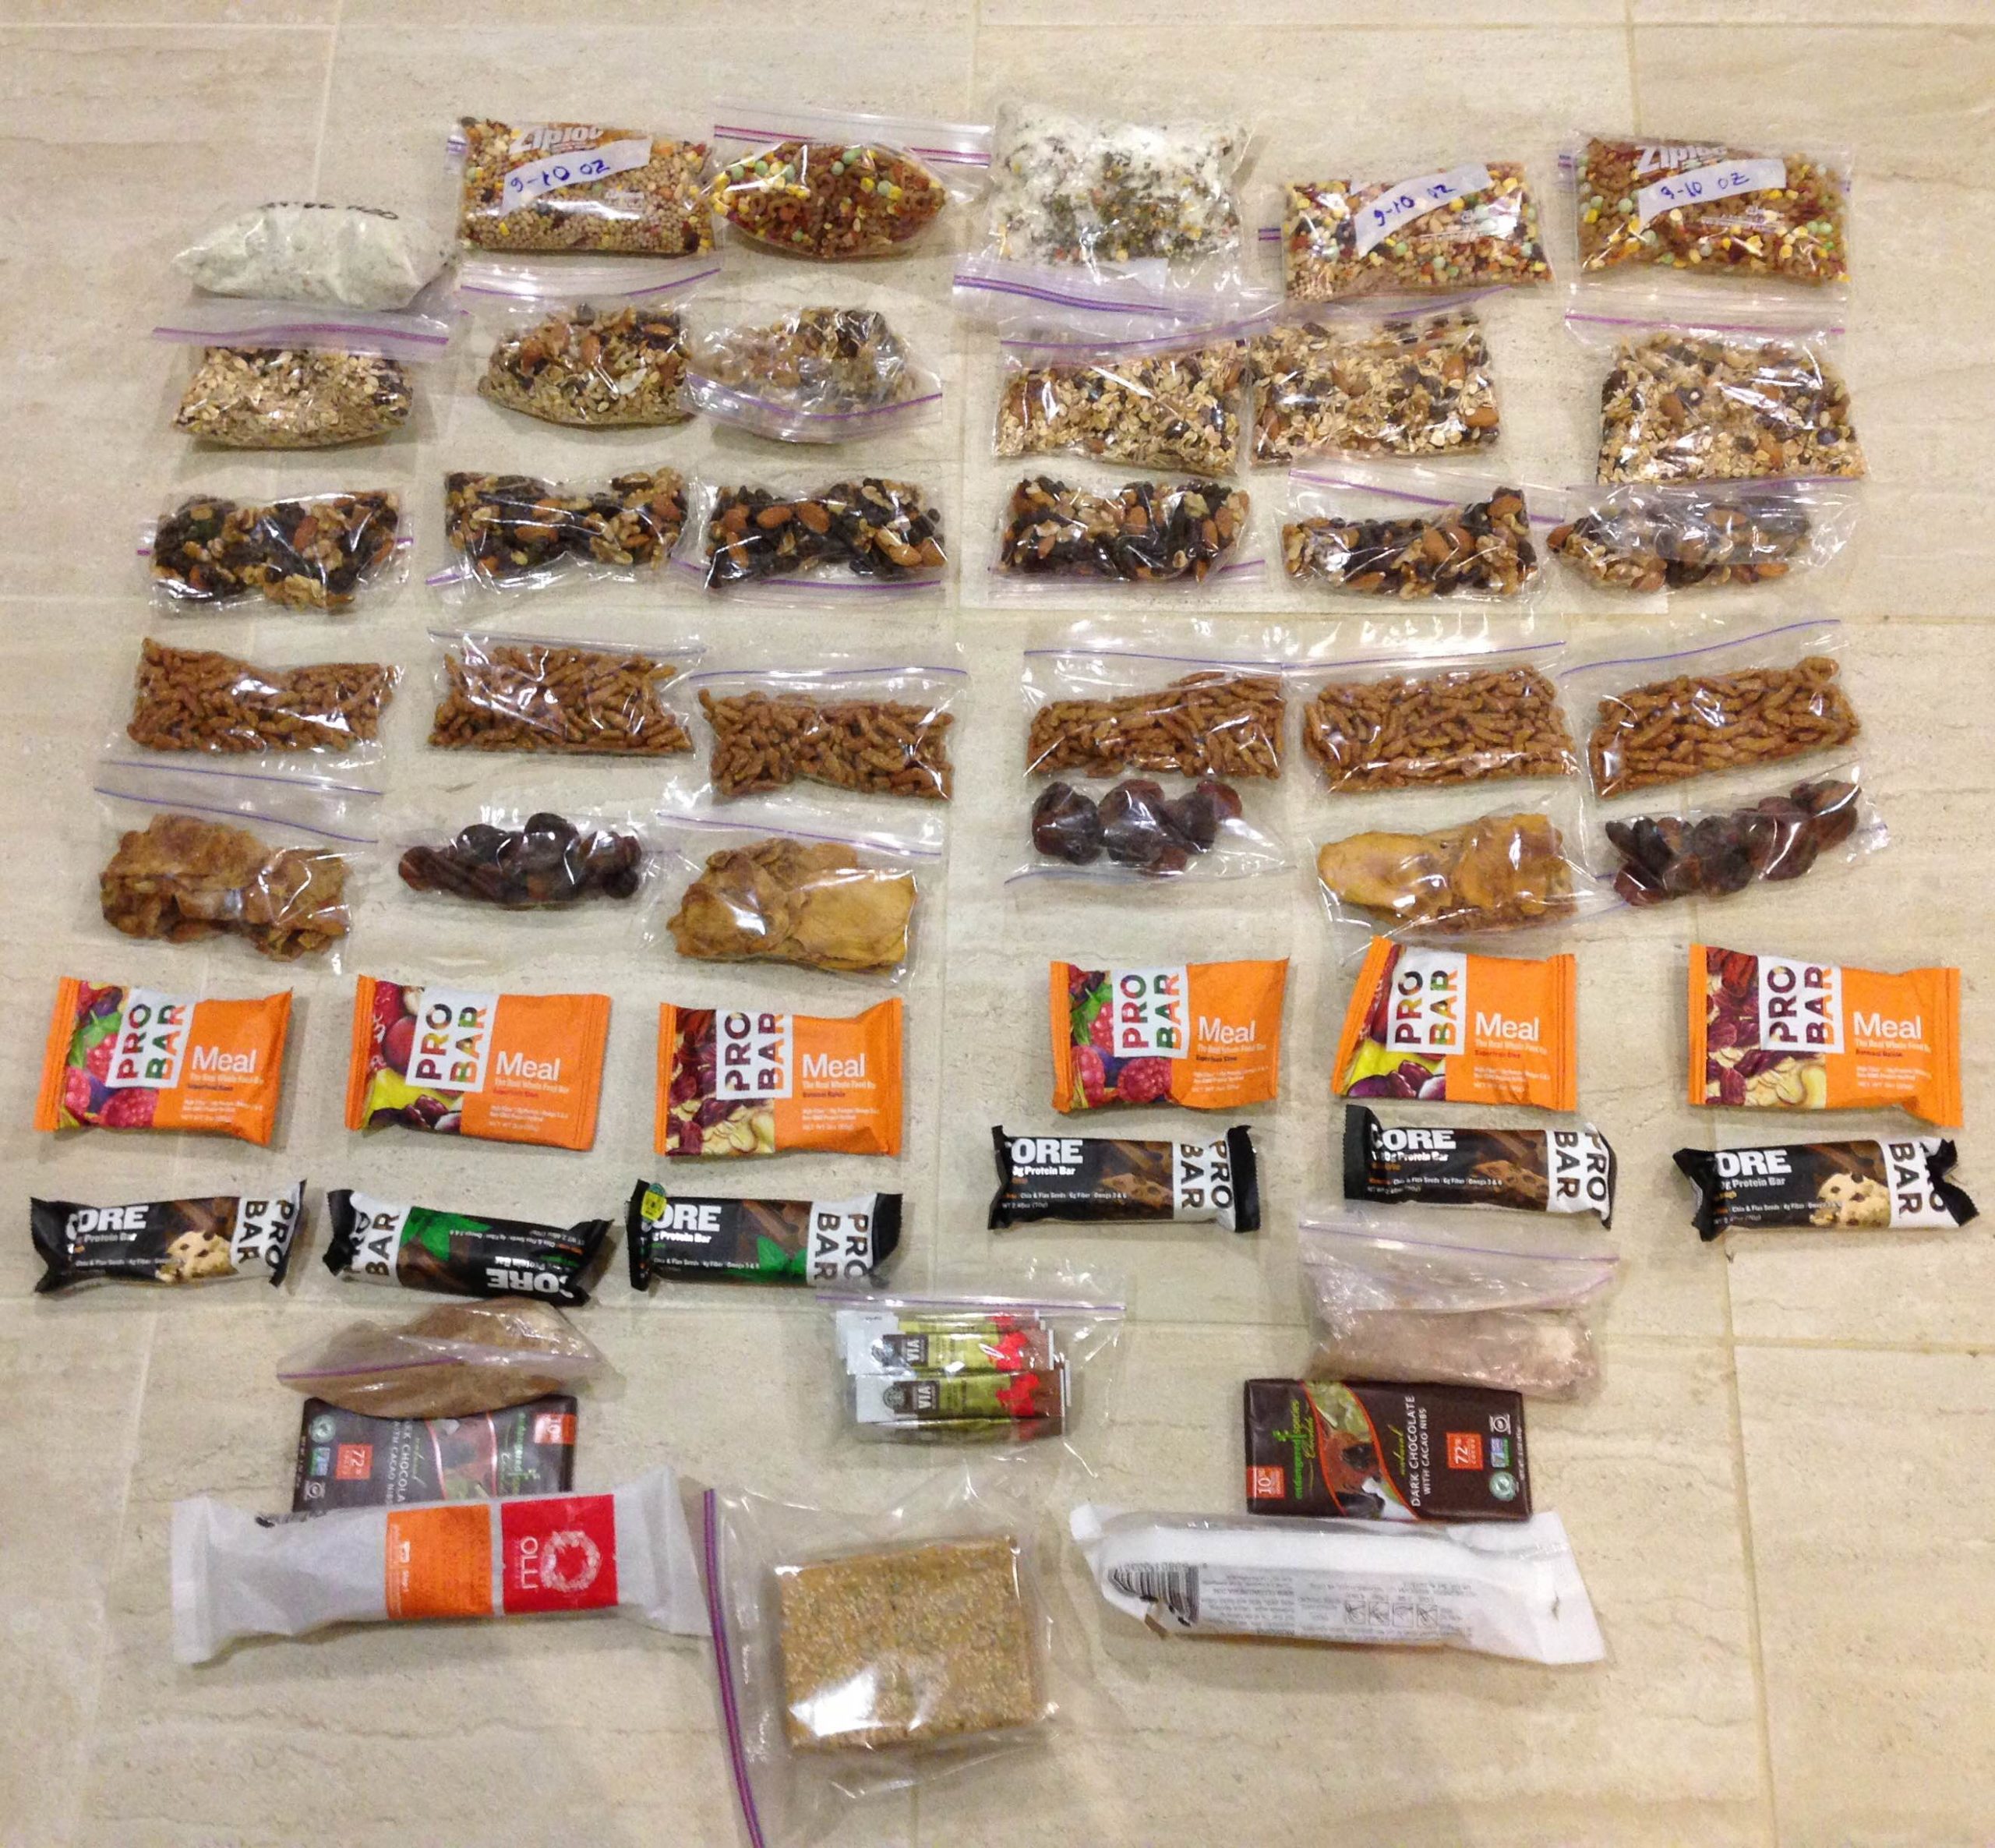 Six days worth backpacking food lies in rows on the floor. Dehydrated meals, trail mix, and dried fruit have been repackaged into small ziplock pages. The allotment also contains bars, instant coffee, and two bars of chocolate.